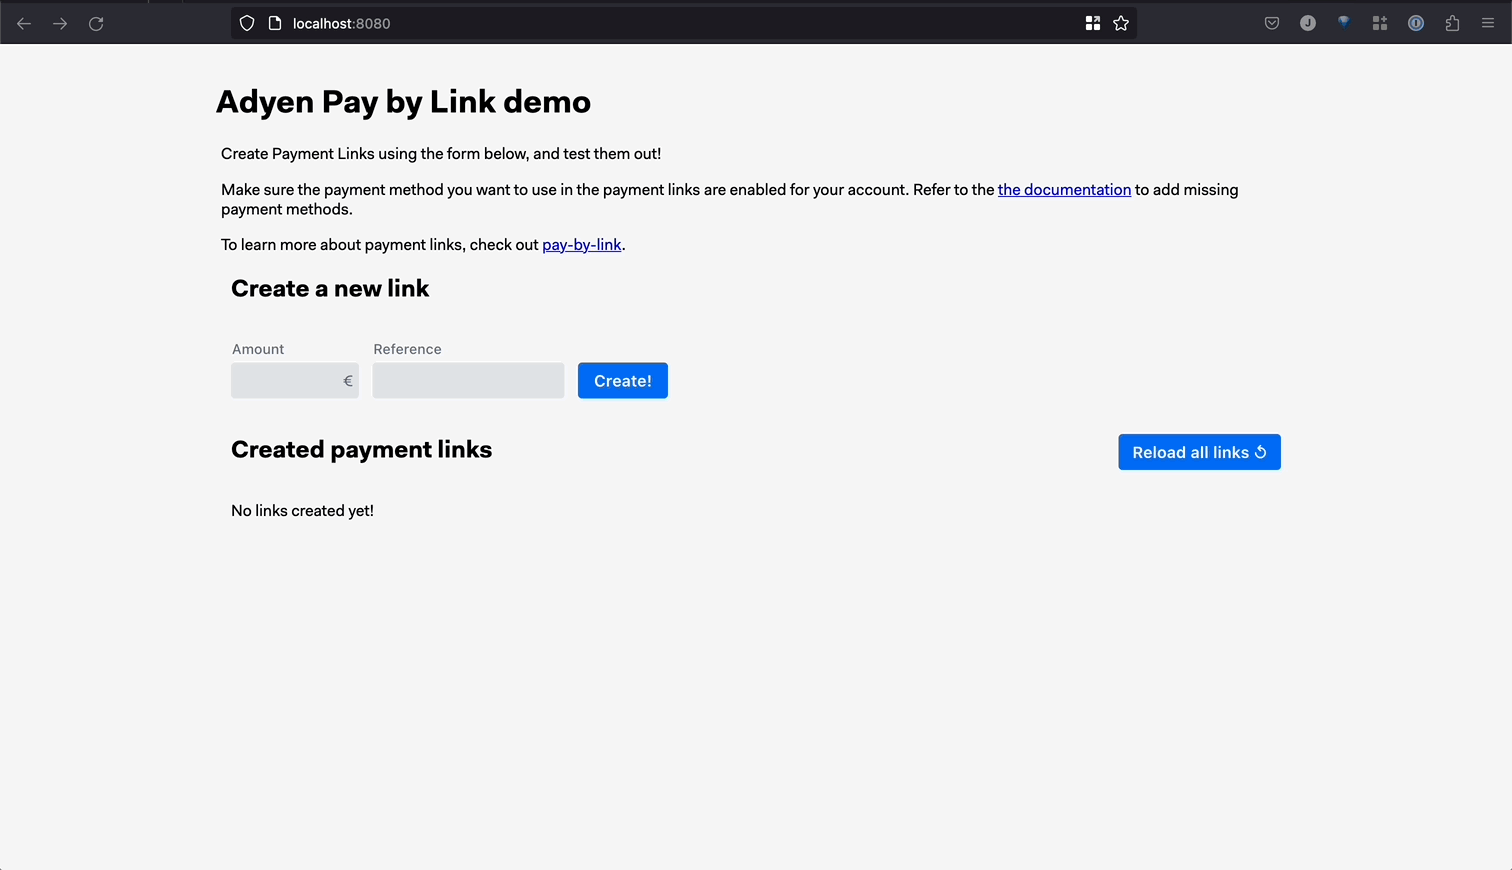 Pay by Link Demo